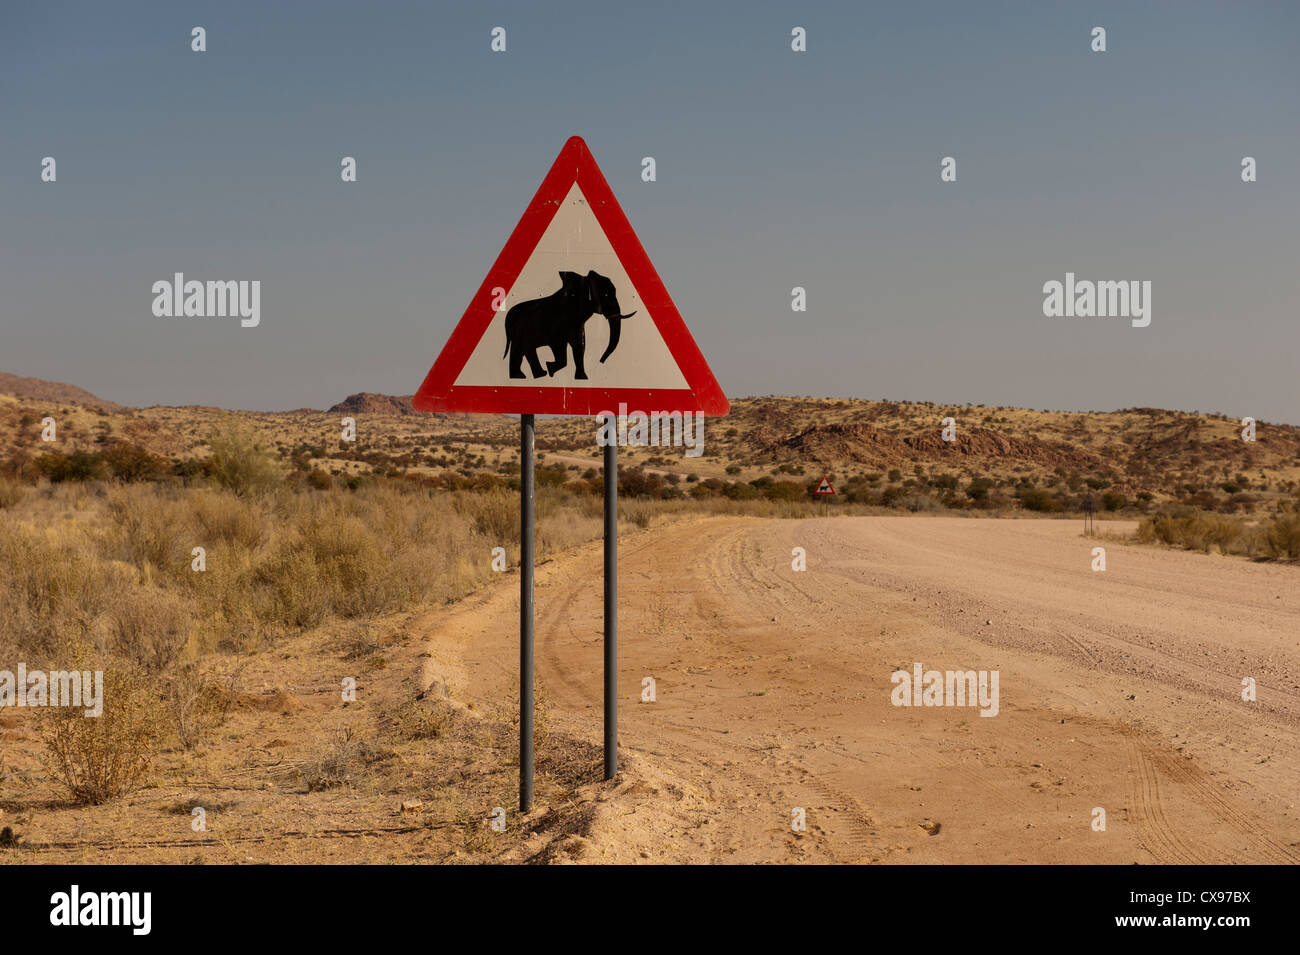 Typical road sign warning of elephants on the road ahead in Namibia, Africa Stock Photo